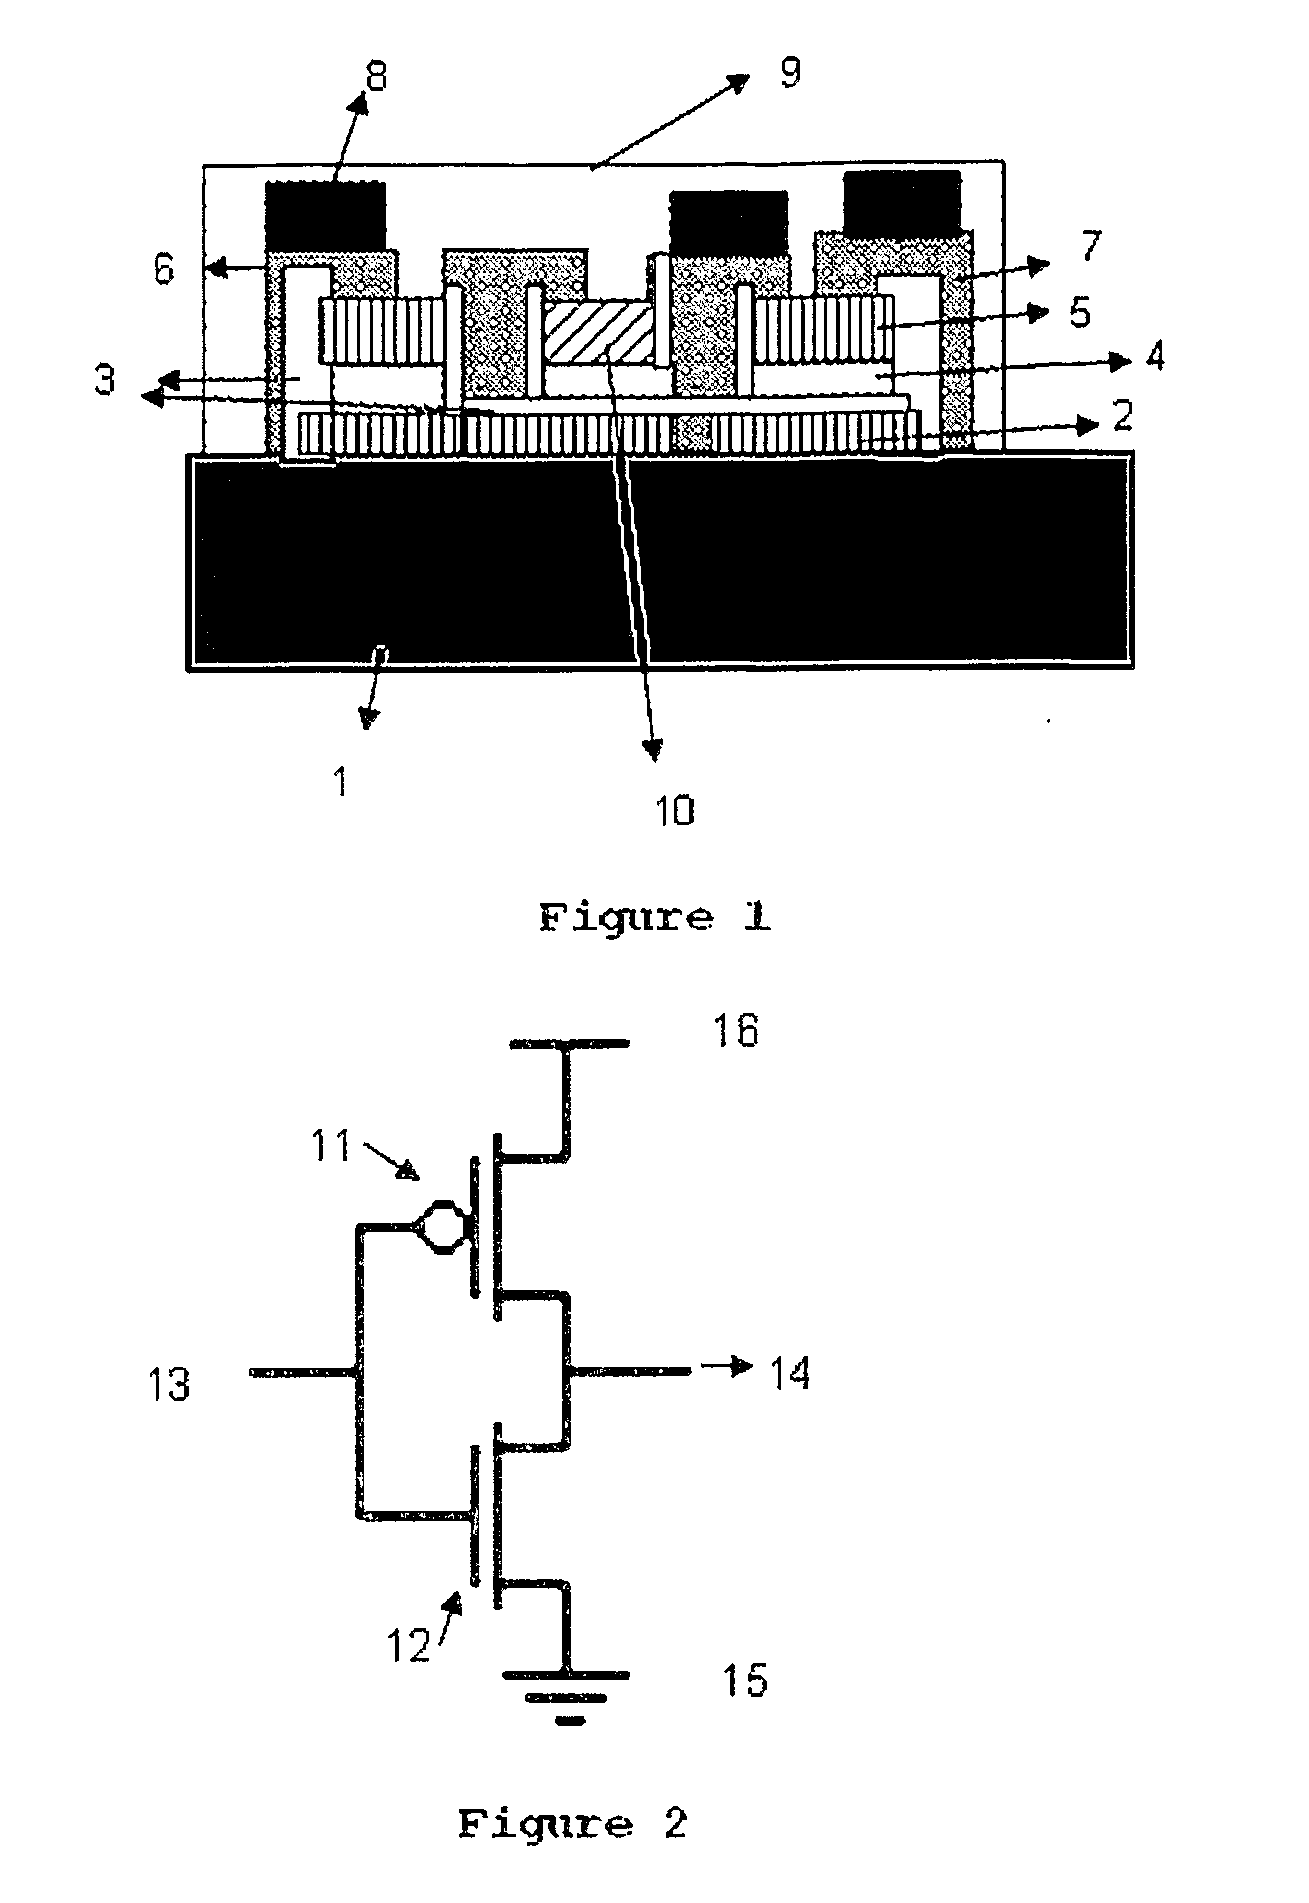 ELECTRONIC SEMICONDUCTOR DEVICE BASED ON COPPER NICKEL AND GALLIUM-TIN-ZINC-COPPER-TITANIUM p AND n-TYPE OXIDES, THEIR APPLICATIONS AND CORRESPONDING MANUFACTURE PROCESS